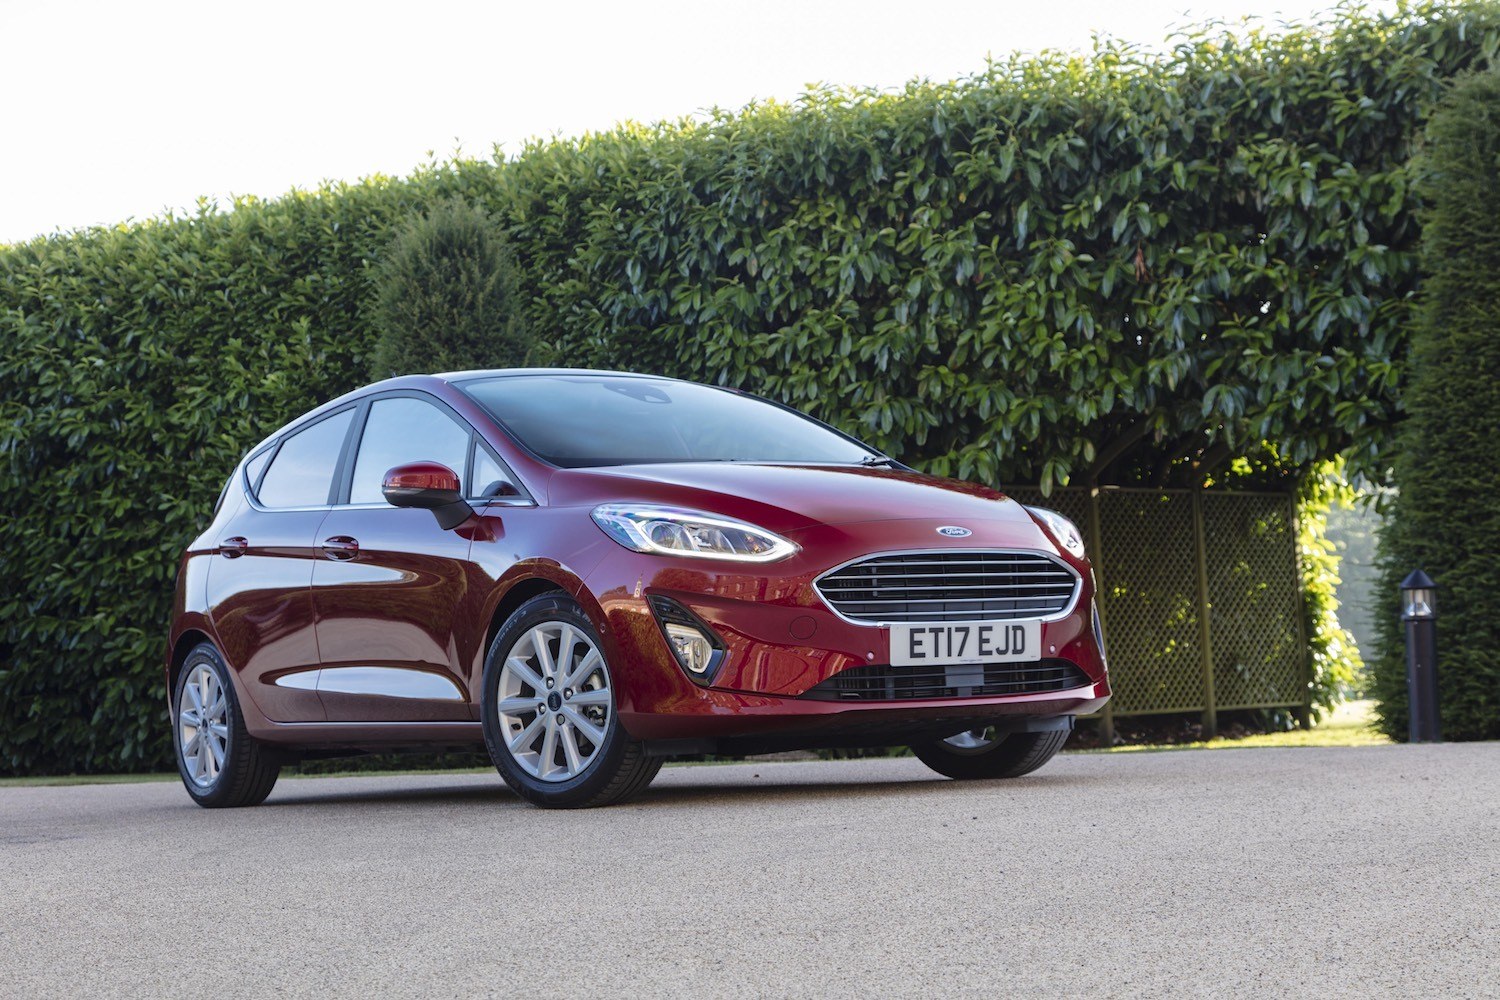 Tom Scanlan reviews the All New Ford Fiesta for Drive 19